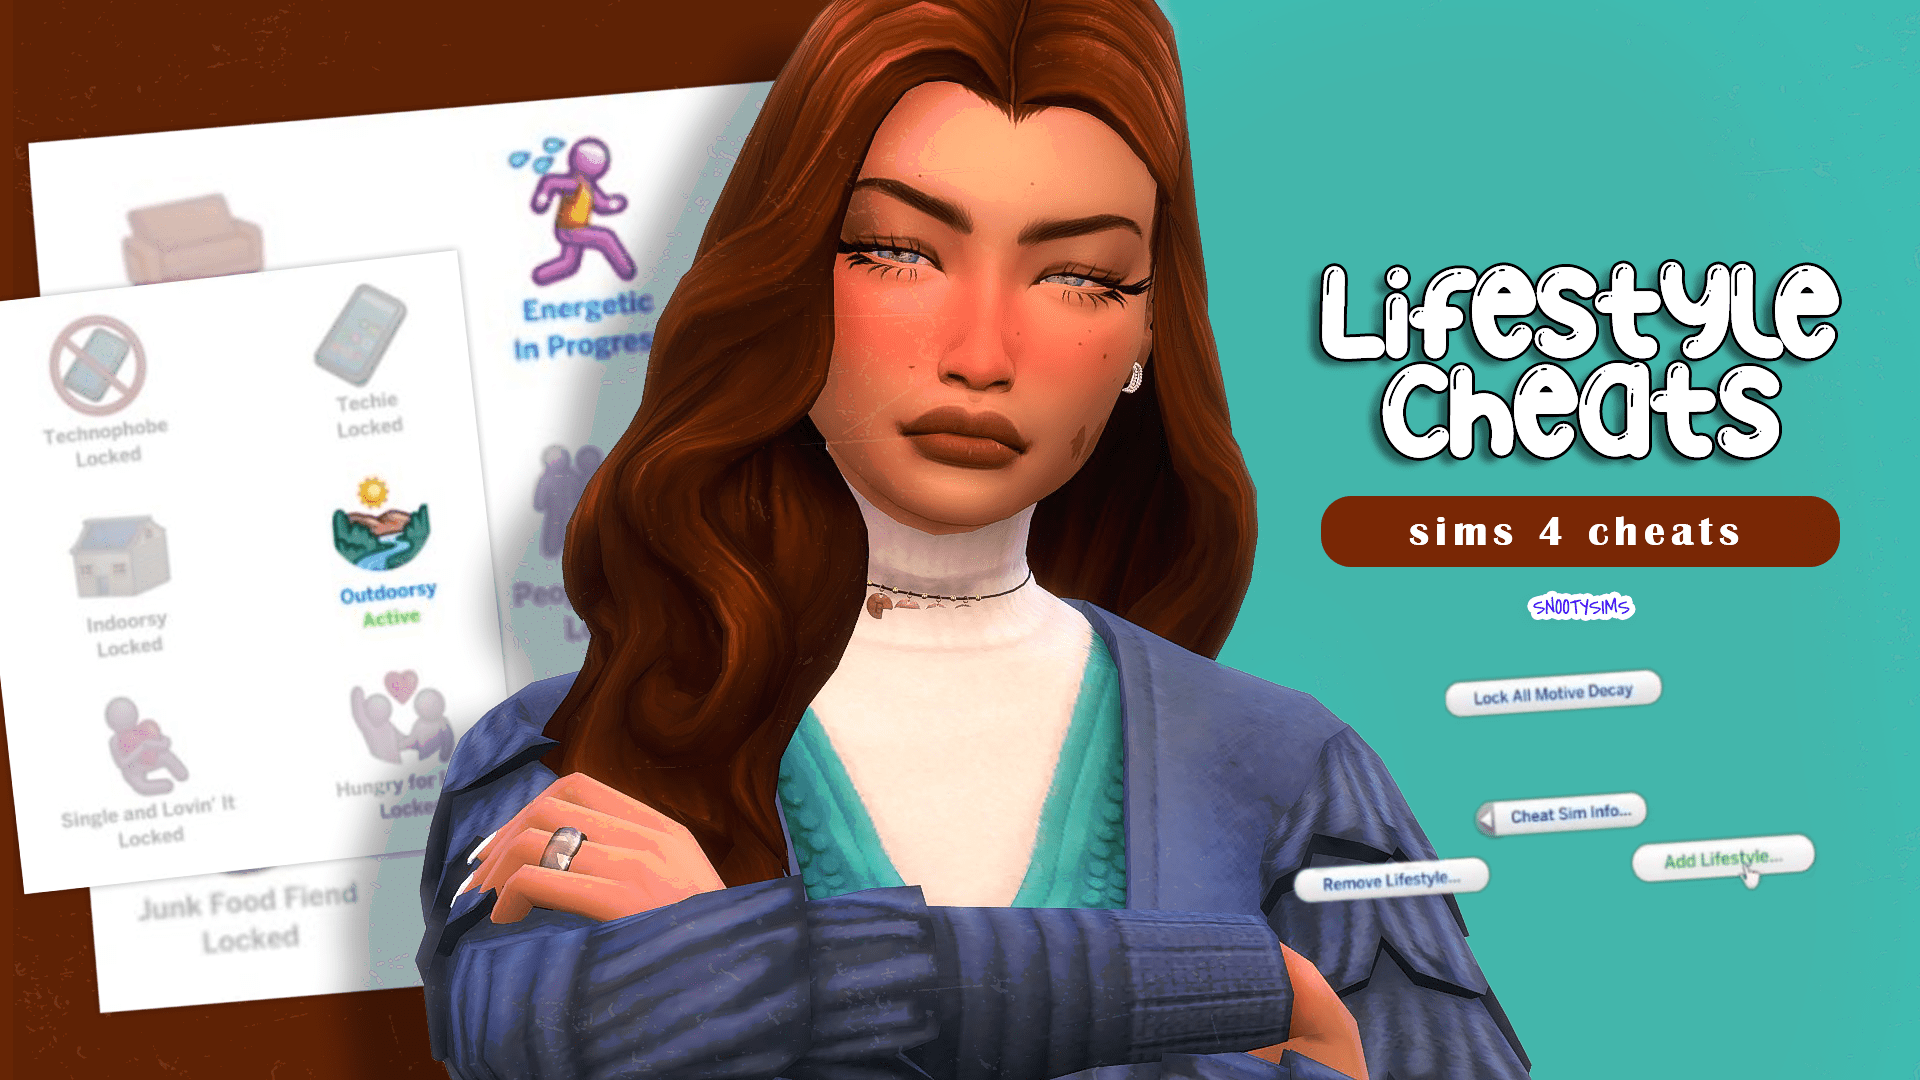 The Sims 4 Eco Lifestyle CHEATS PC Mac XBox One + PS4 